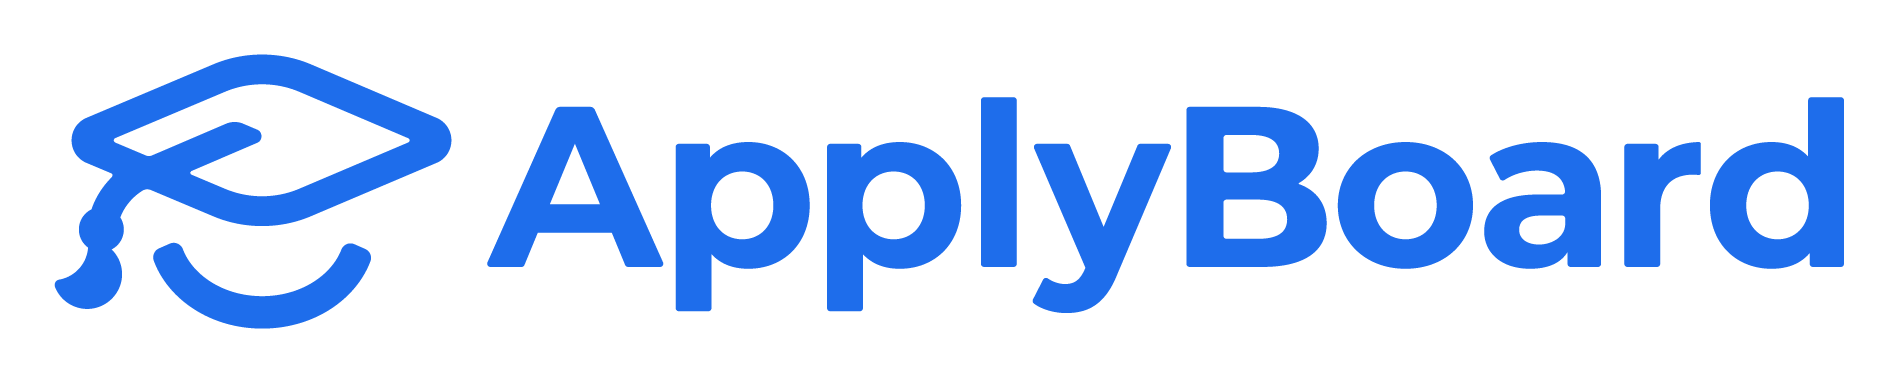 ApplyBoard Welcomes 